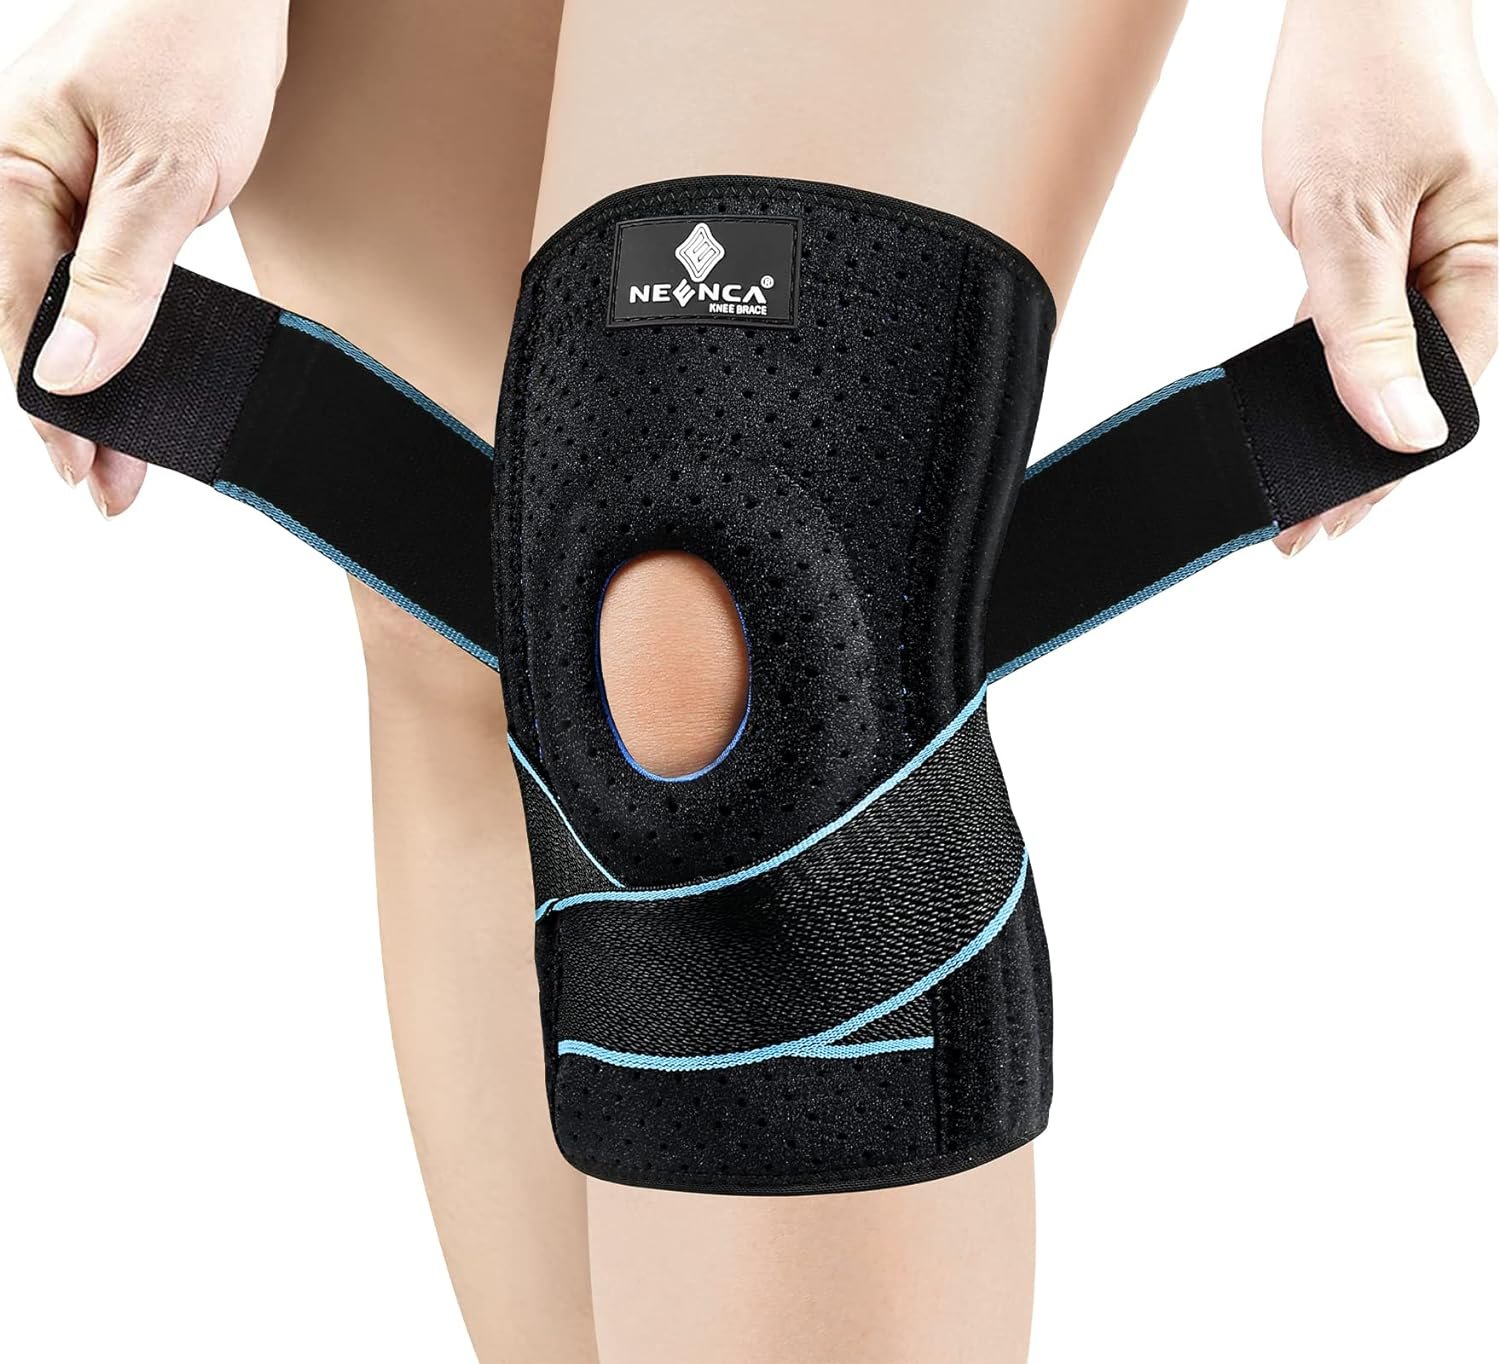 NEENCA Knee Braces for Knee Pain Men  Women, Adjustable Knee Support with Patella Gel Pad  Side Stabilizers, Medical Knee Wrap for Arthritis, Meniscus Tear, ACL, Pain Relief, Running, Sports. ACE-54